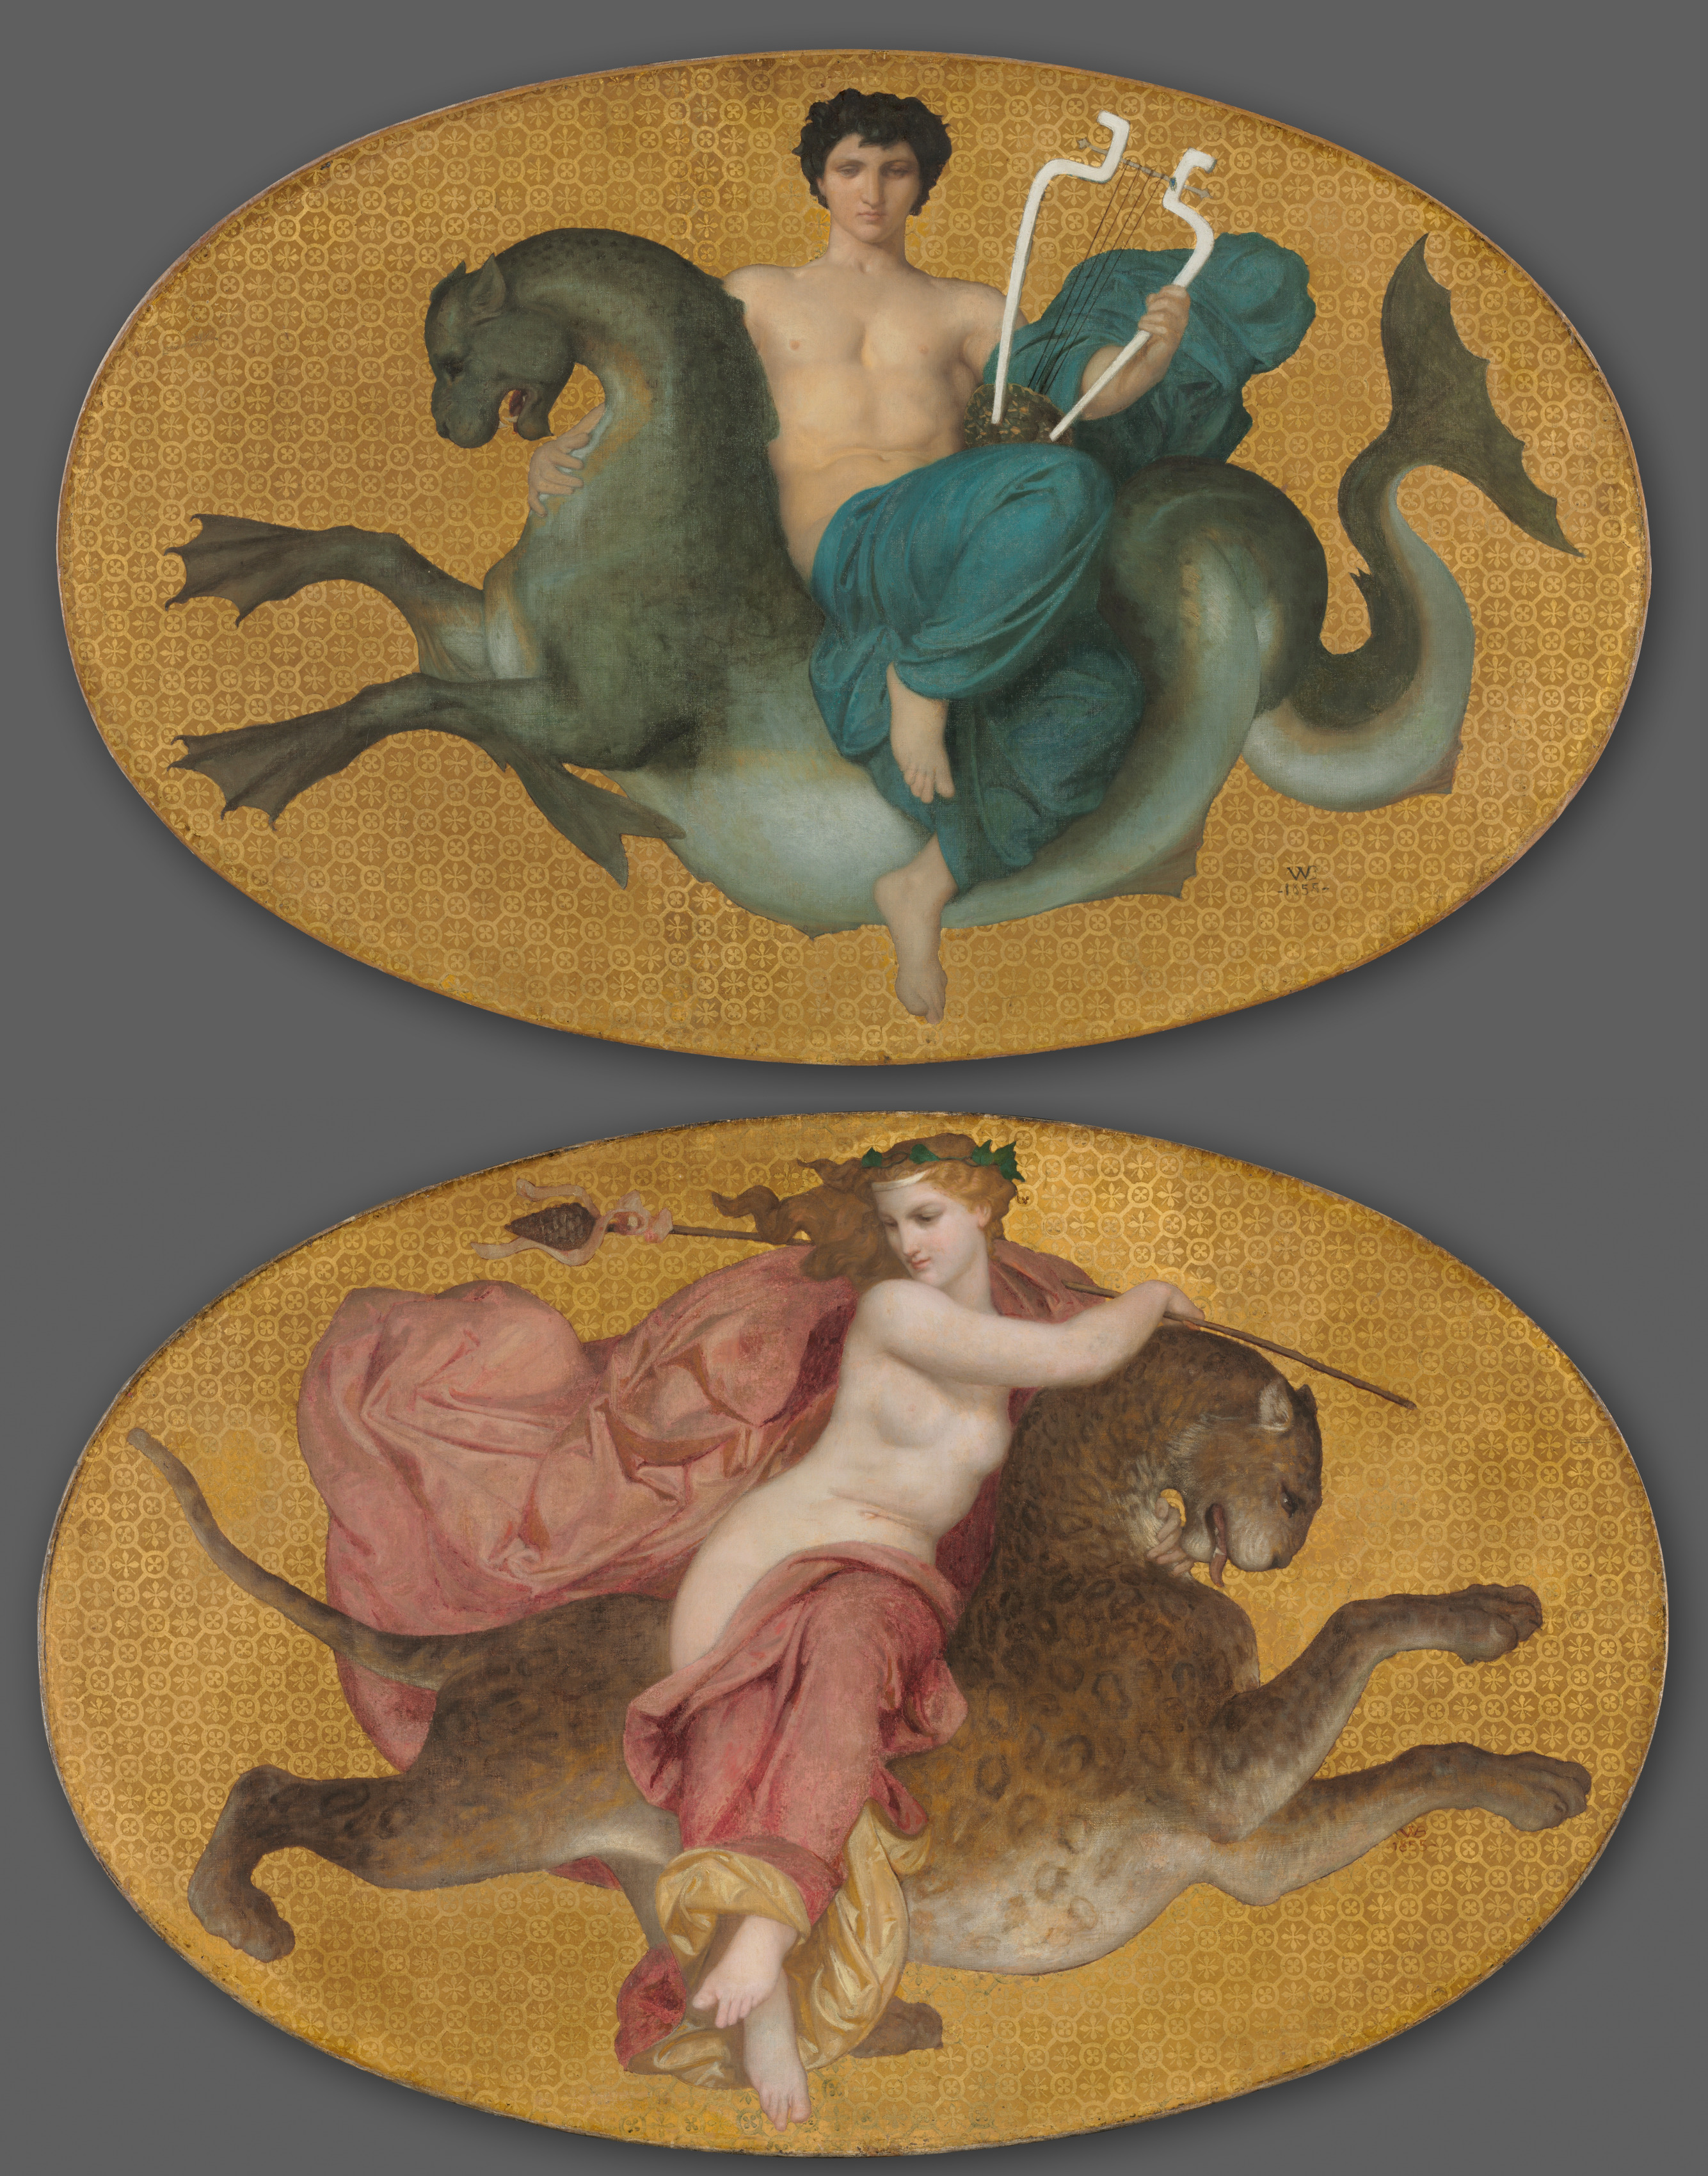 Arion on a Sea Horse and Bacchante on a Panther (pair)